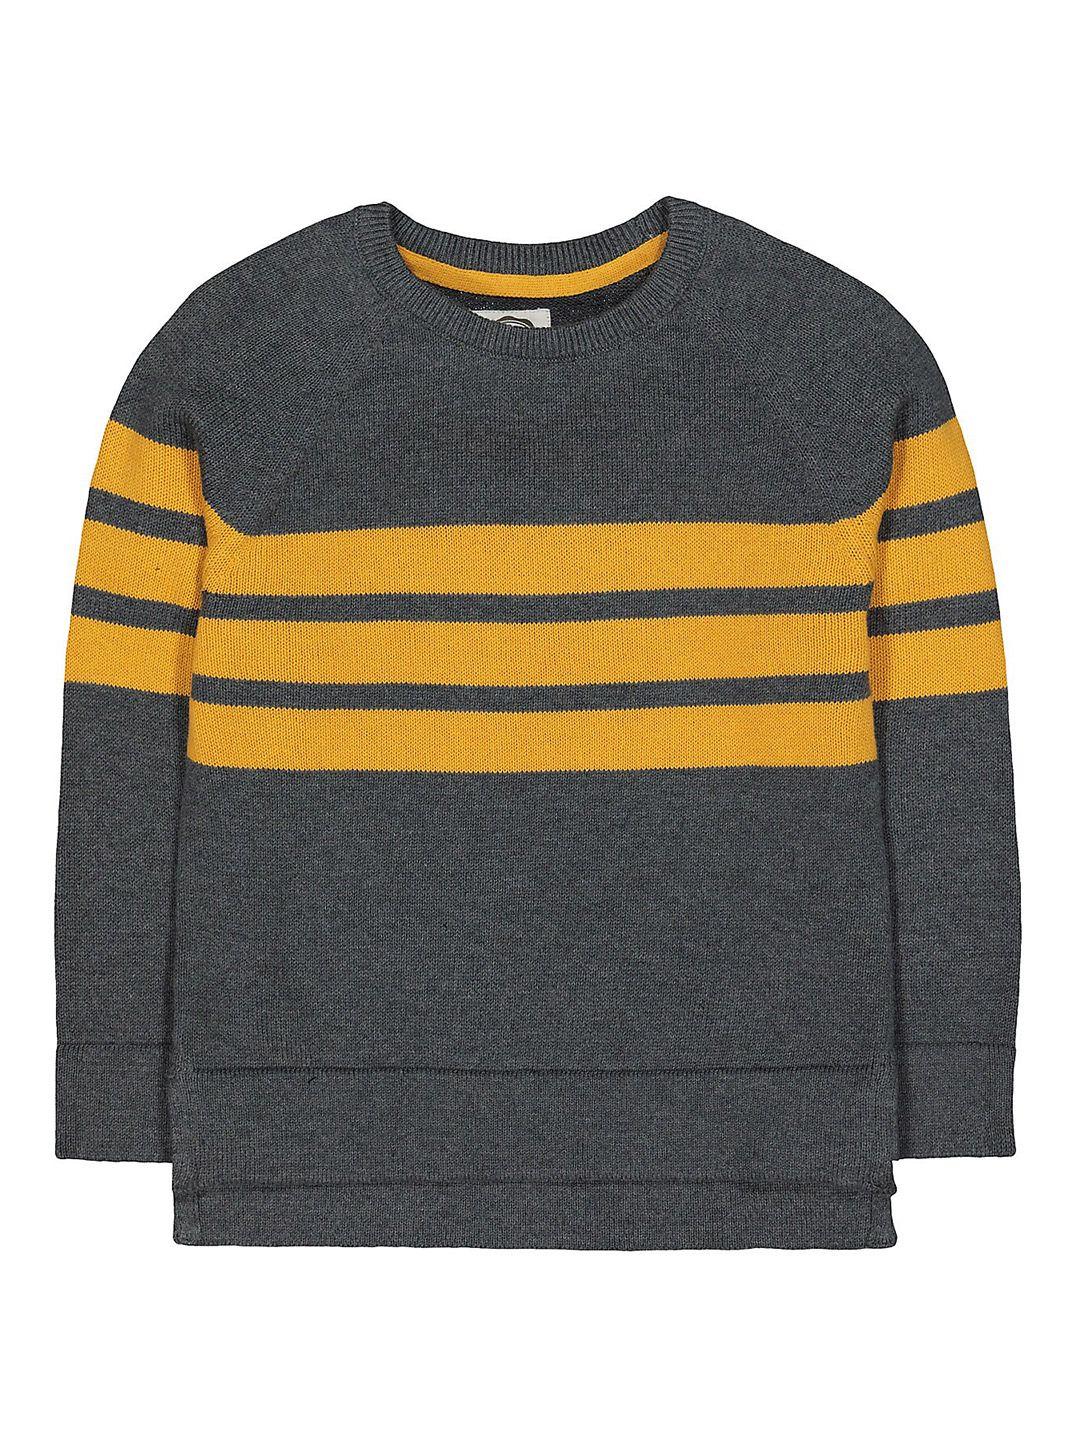 mothercare boys grey & yellow striped striped pullover